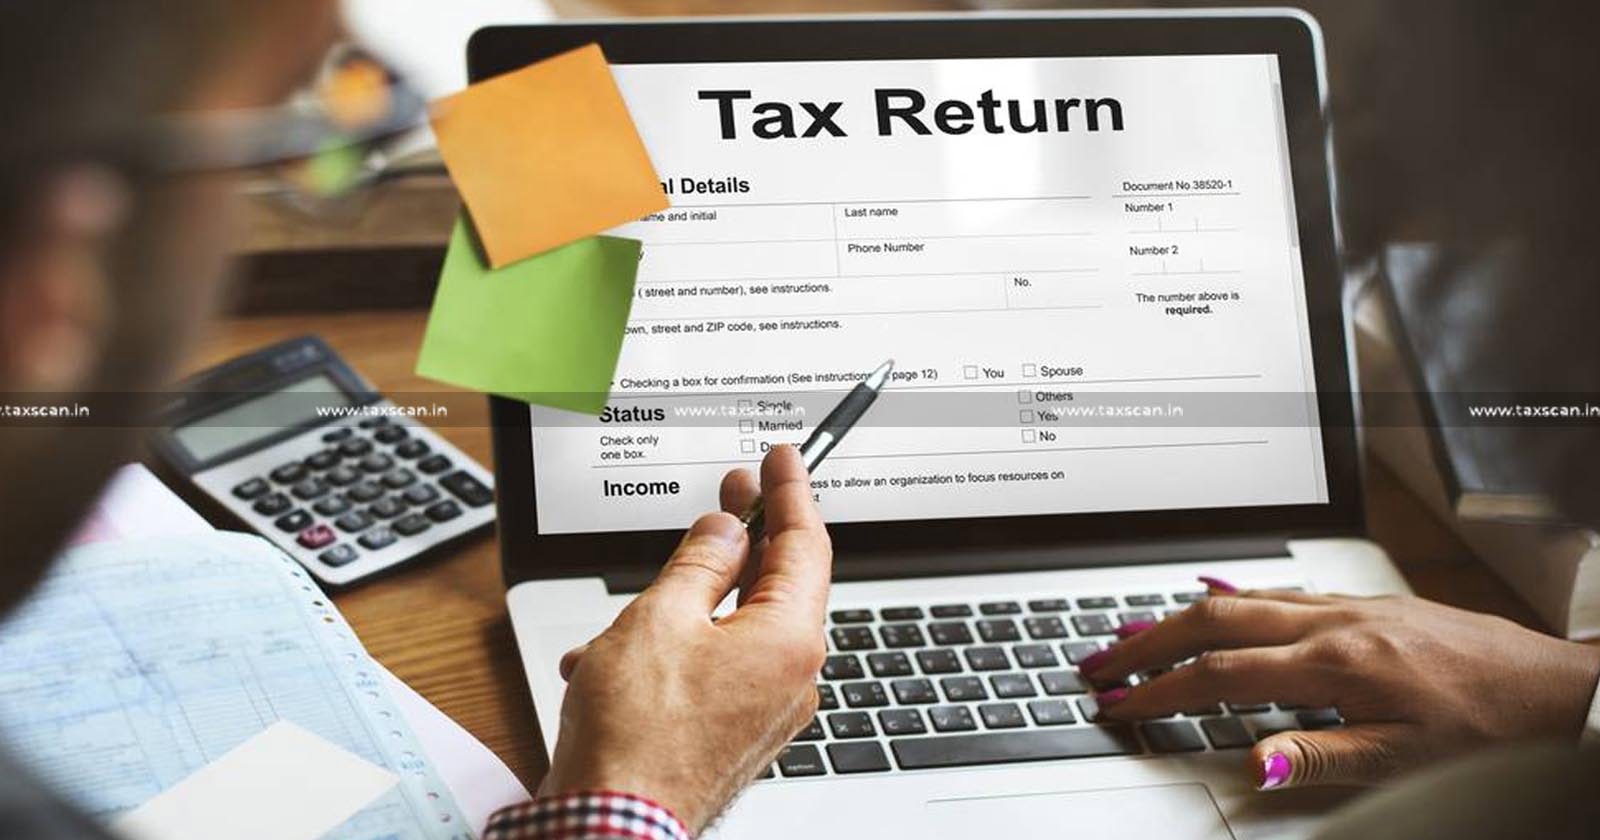 ITAT Orders Reassessment after Assessee Inadvertently Files Return in ITR Form - TAXSCAN